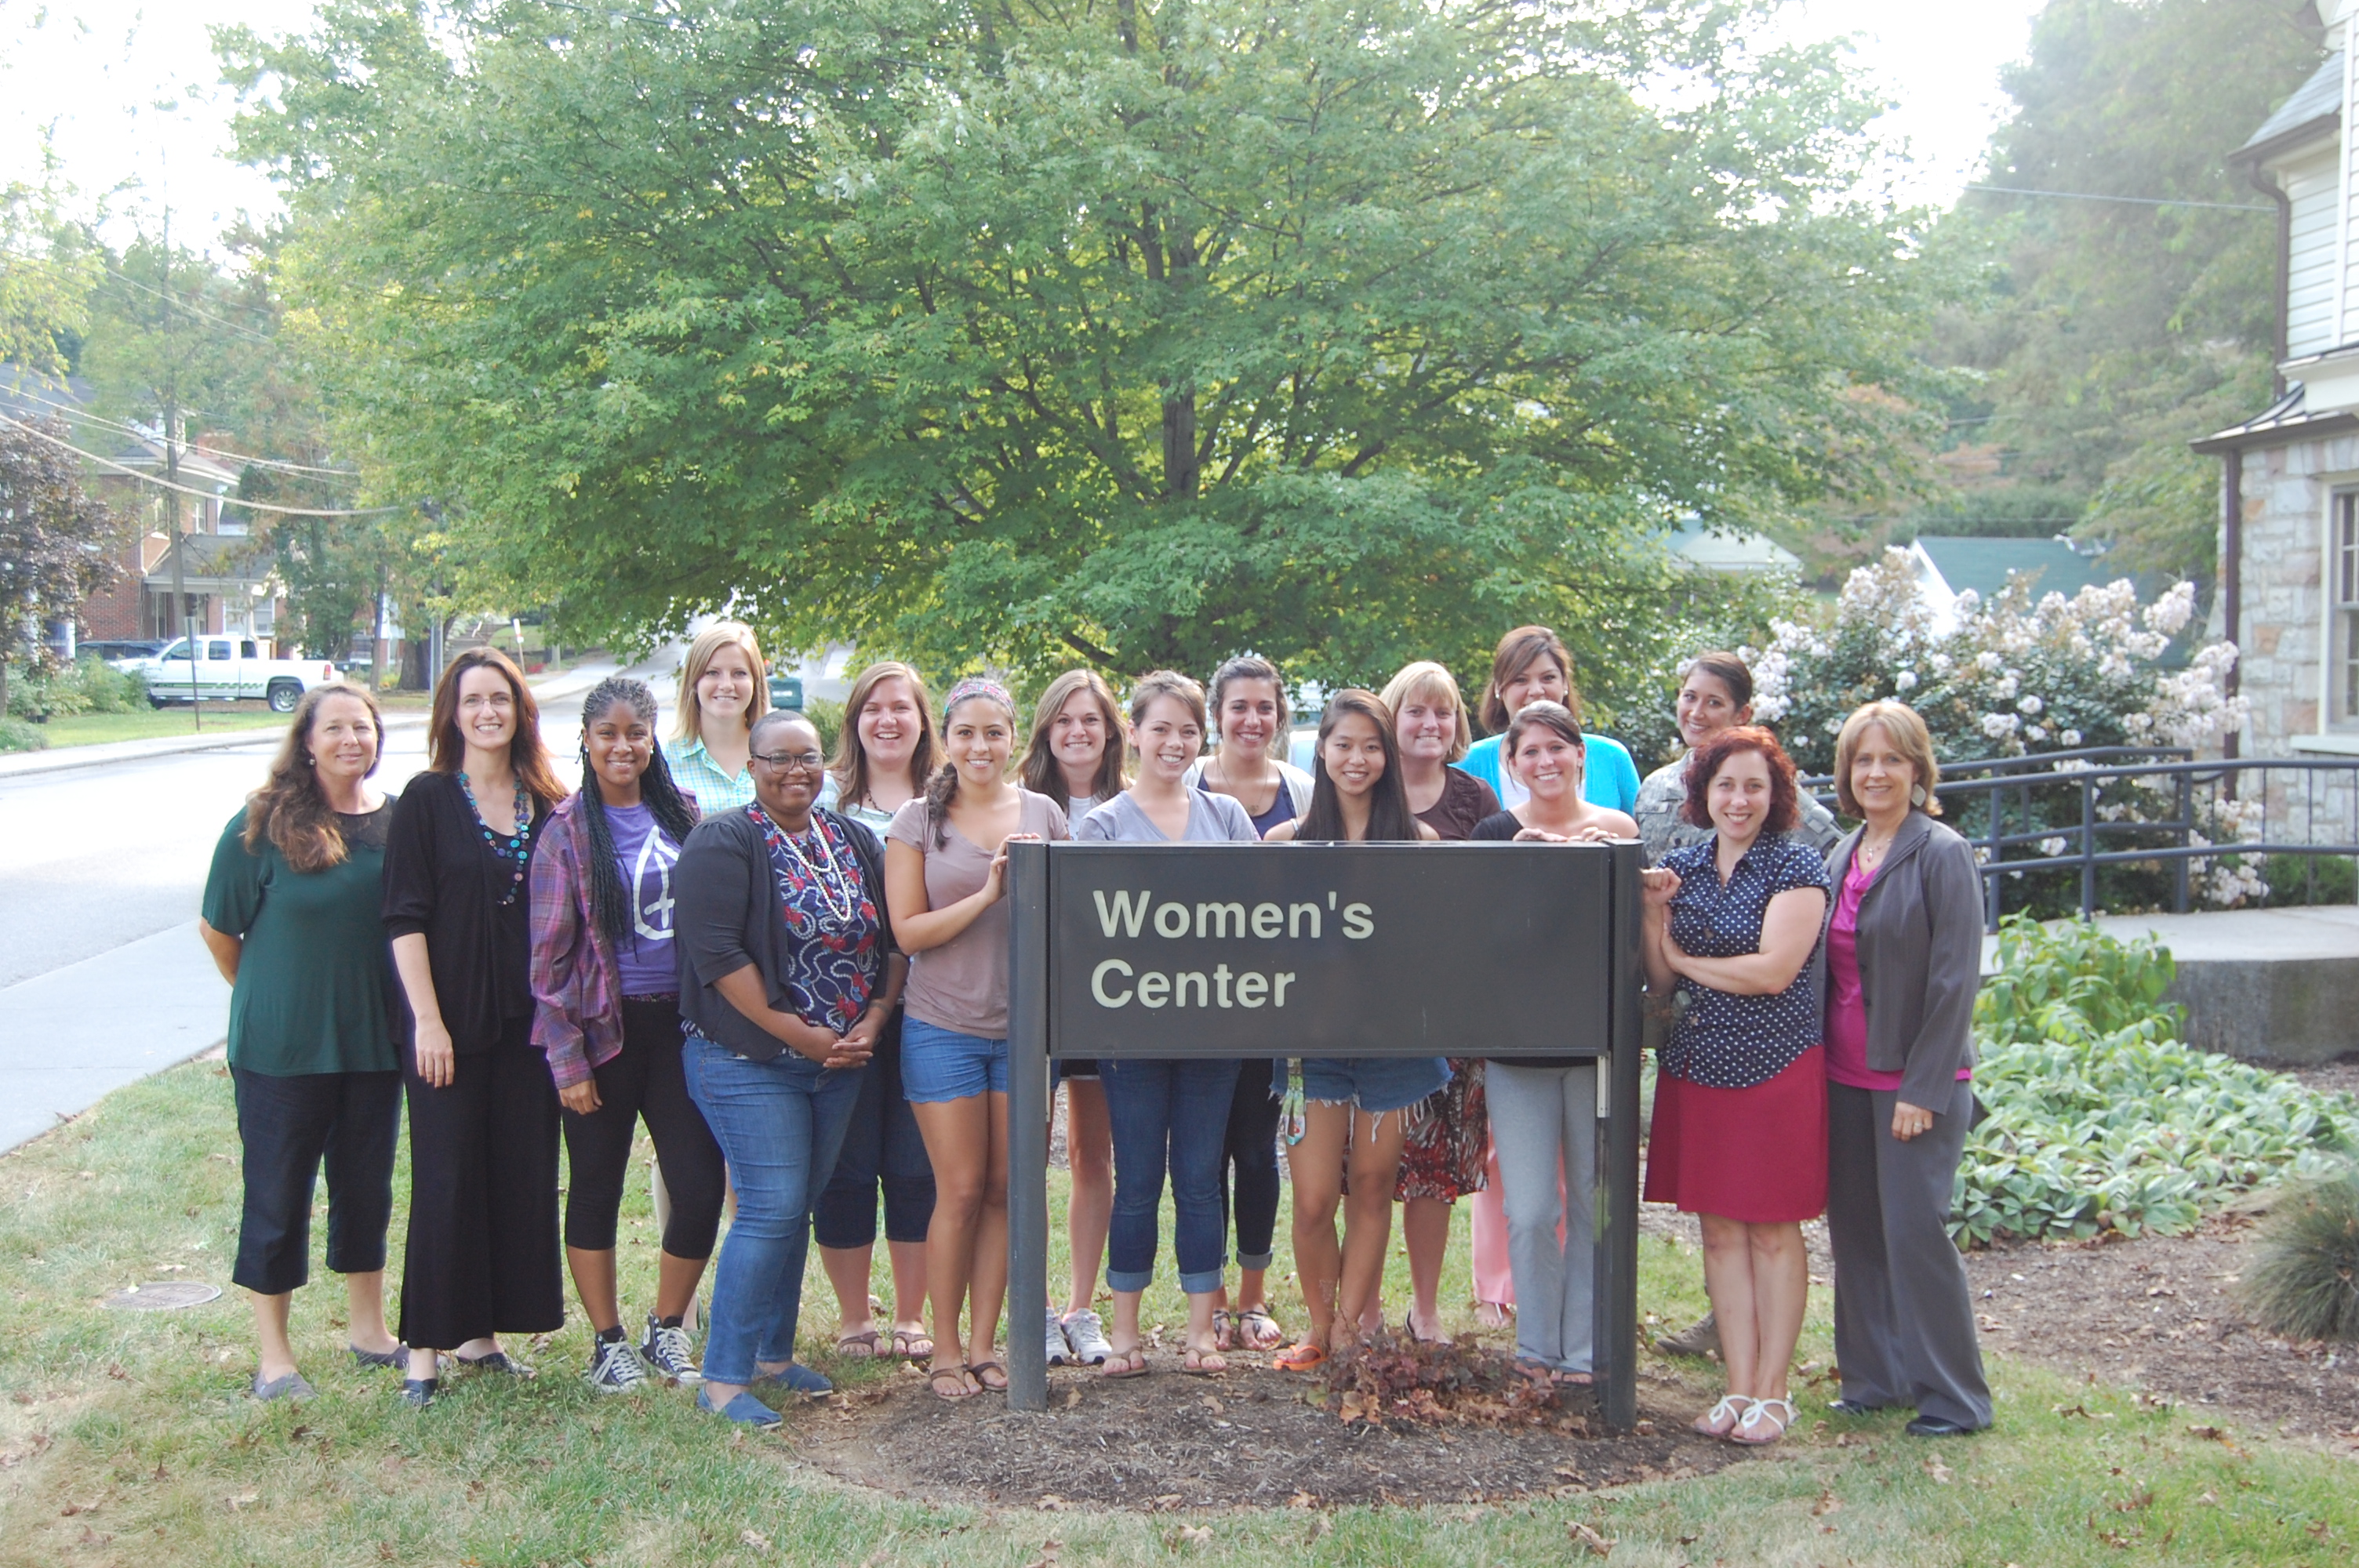 Women's Center professional and student staff